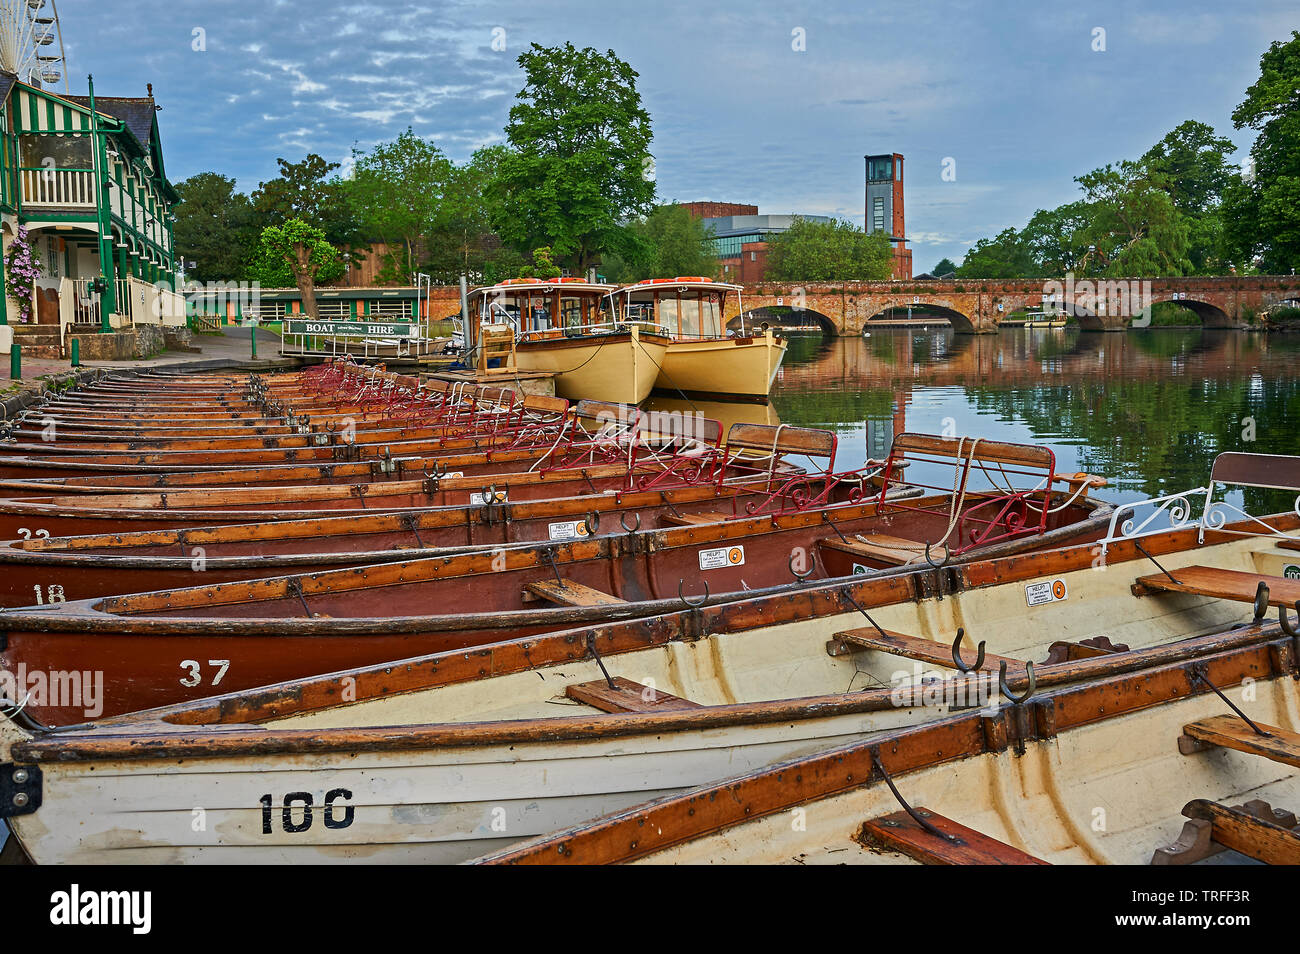 Stratford upon Avon, Warwickshire and boats moored on the River Avon early on a summer morning. Stock Photo